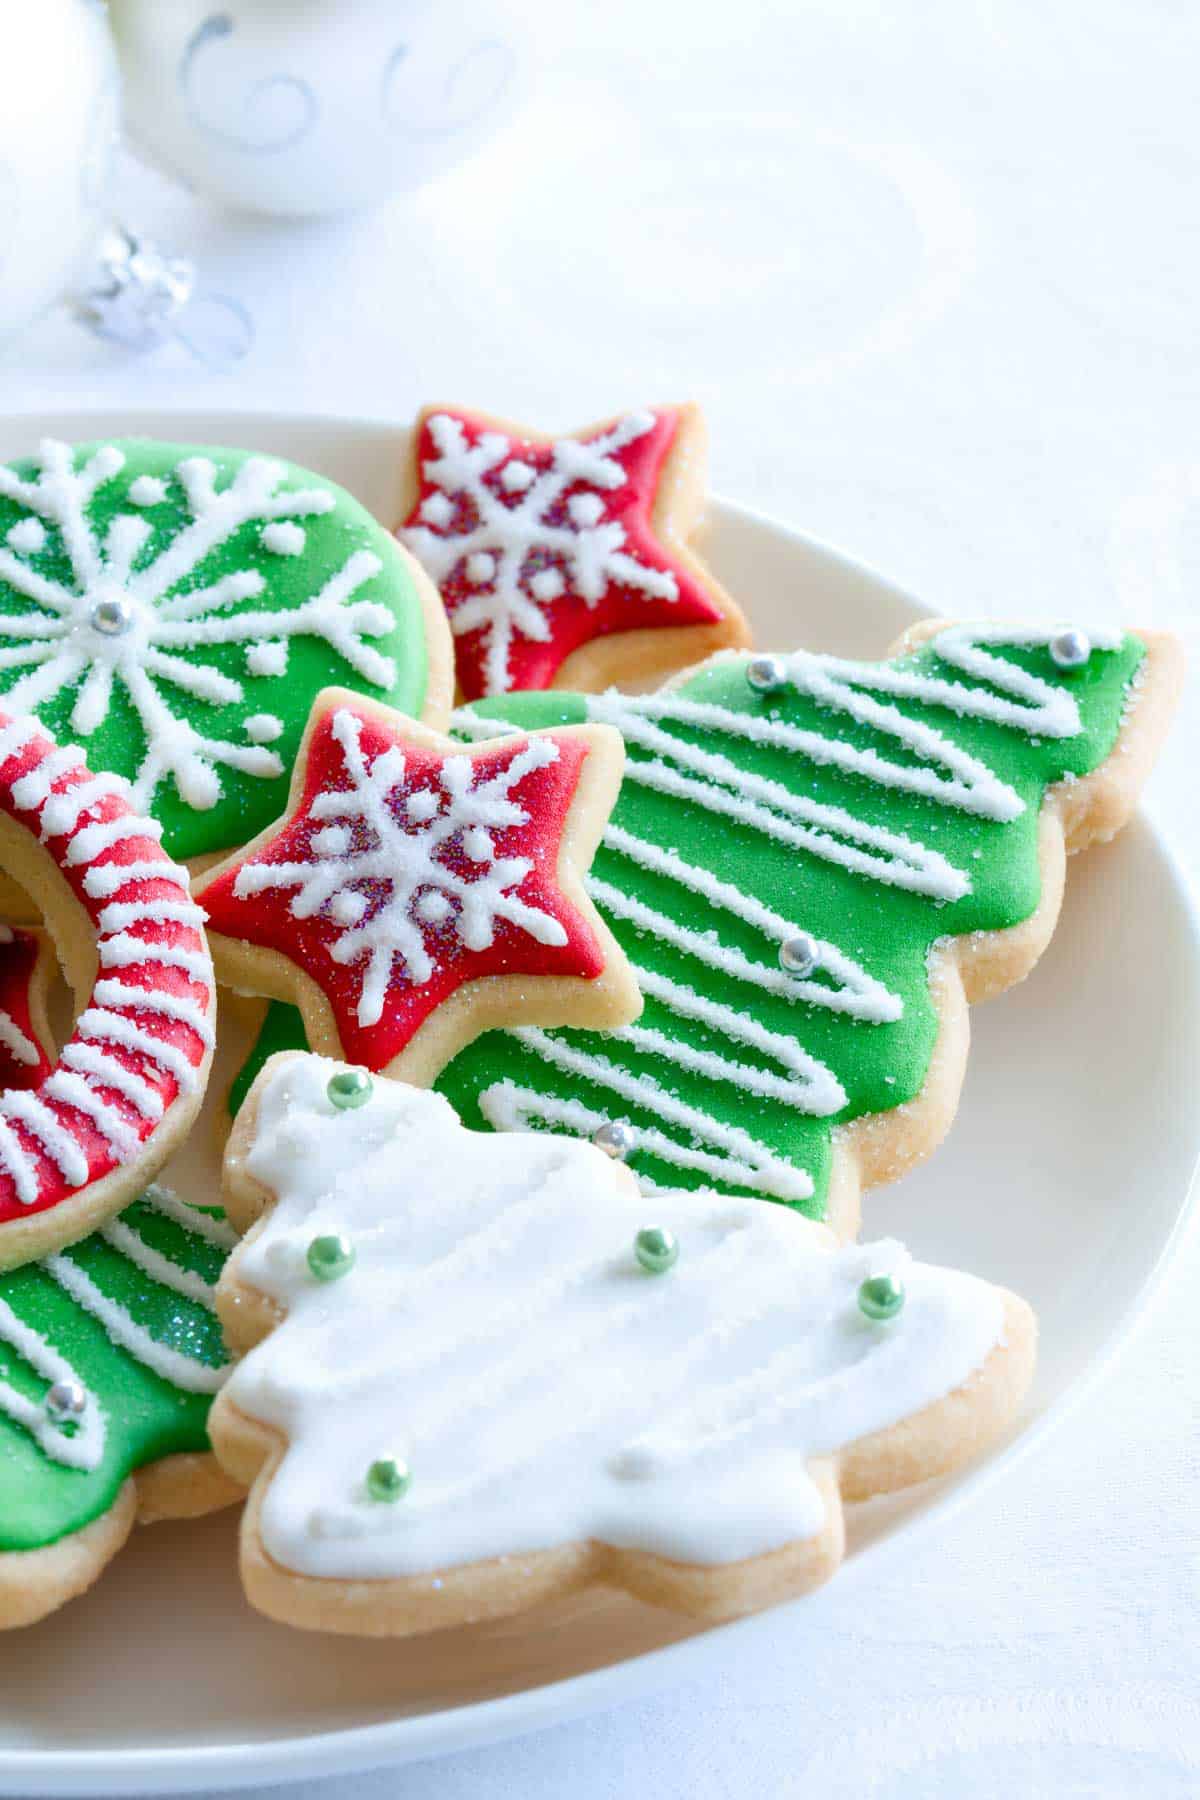 Plate of rolled sugar cookies decorated with royal icing.